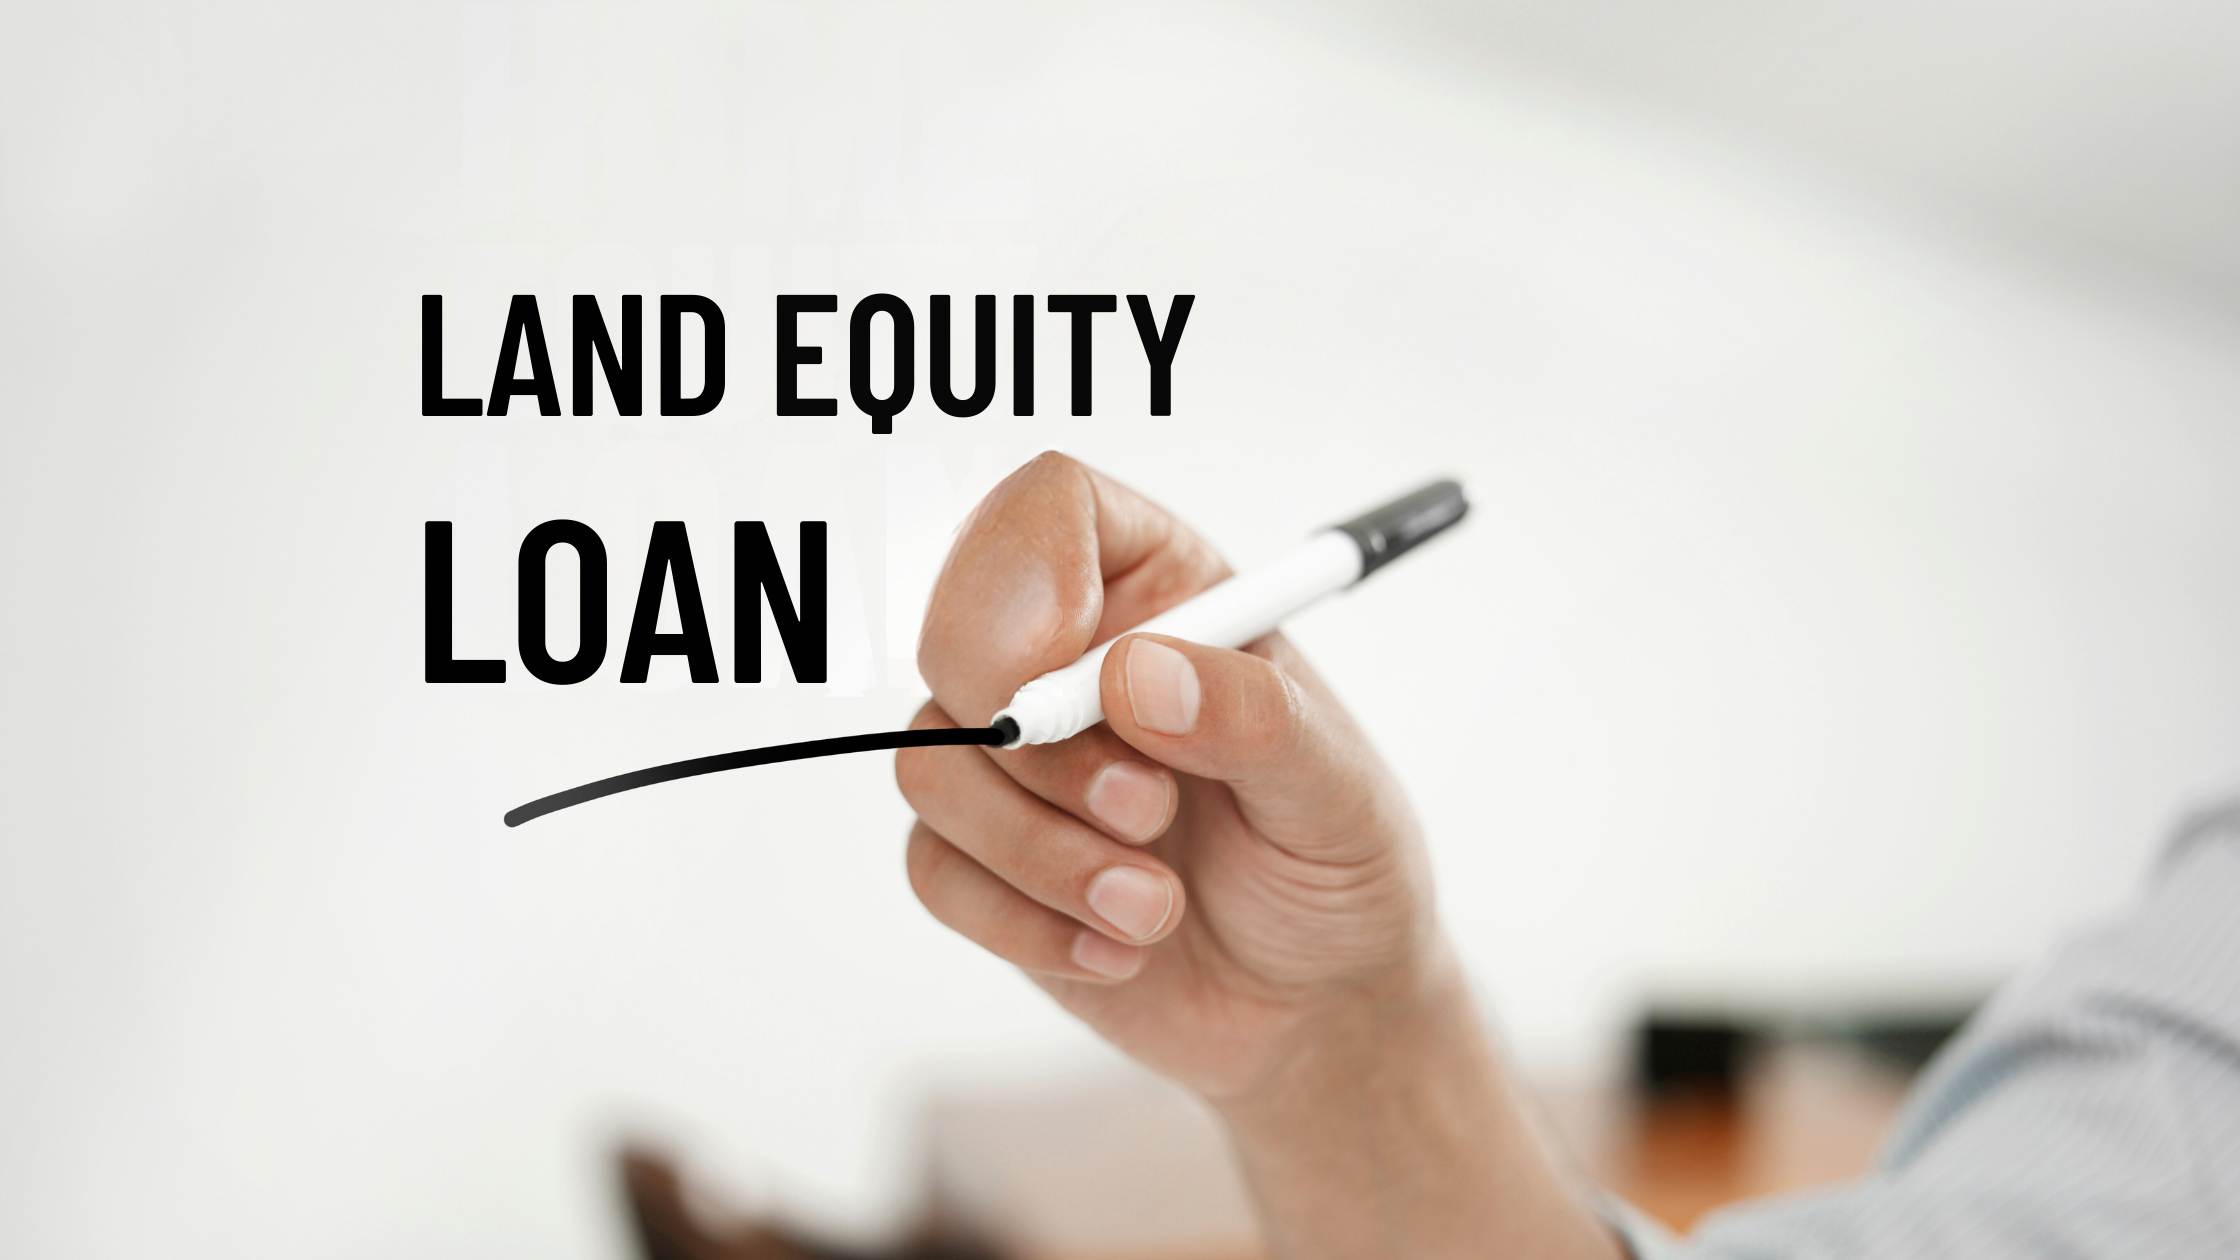 How to Leverage Land Equity Loans for Financial Growth